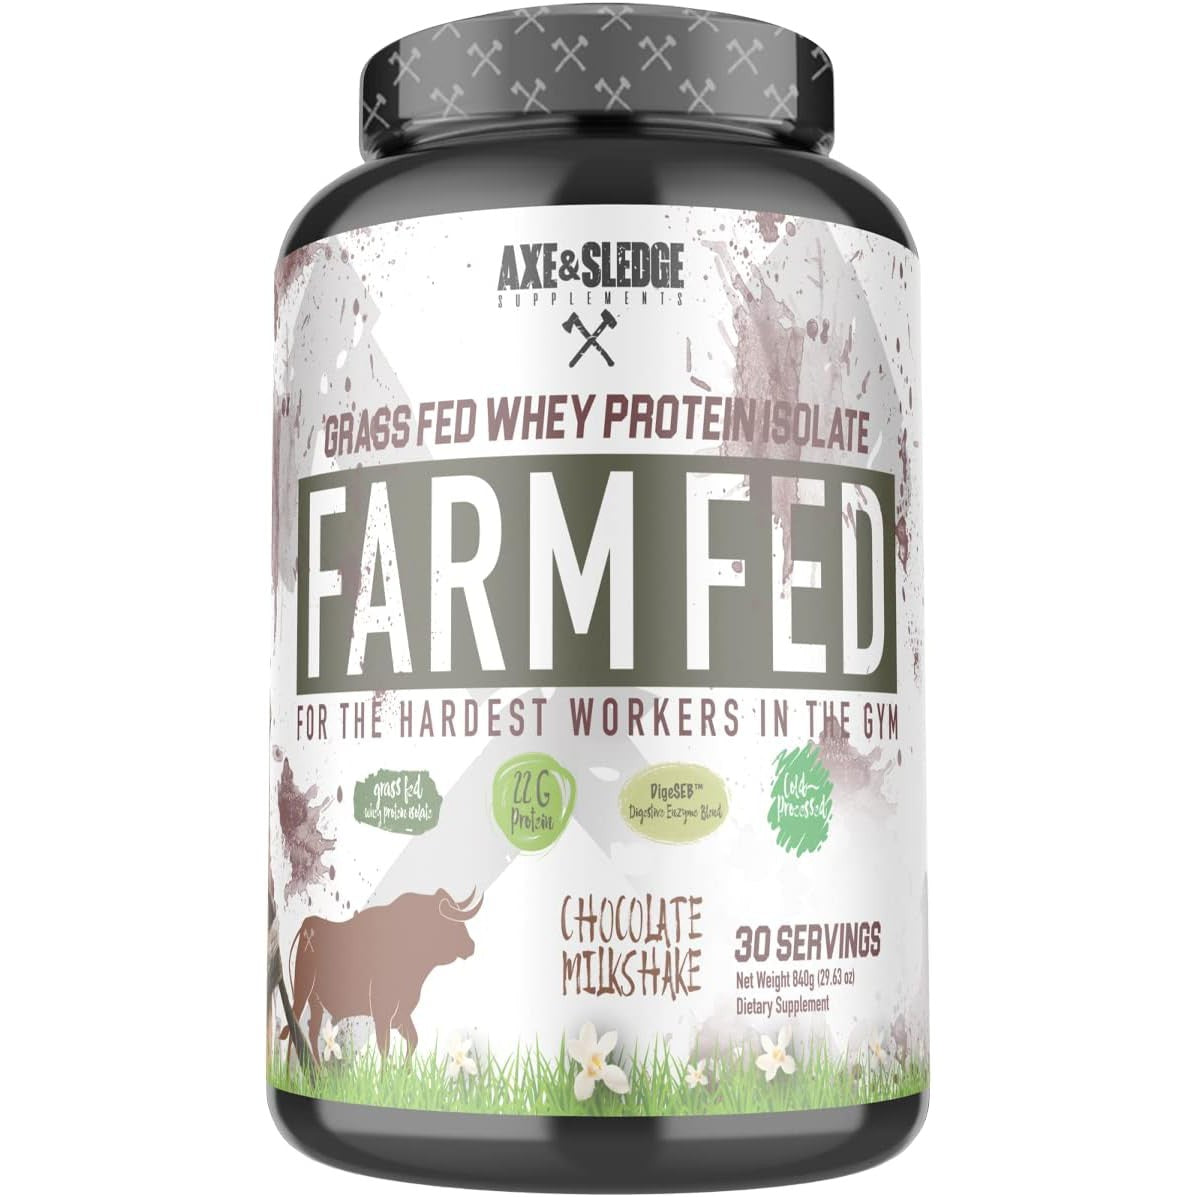 Axe & Sledge Supplements Farm Fed Grass-Fed Whey Protein Isolate with Digestive Enzymes, 22 Grams Protein, 840g 30 Servings - Chocolate Milkshake